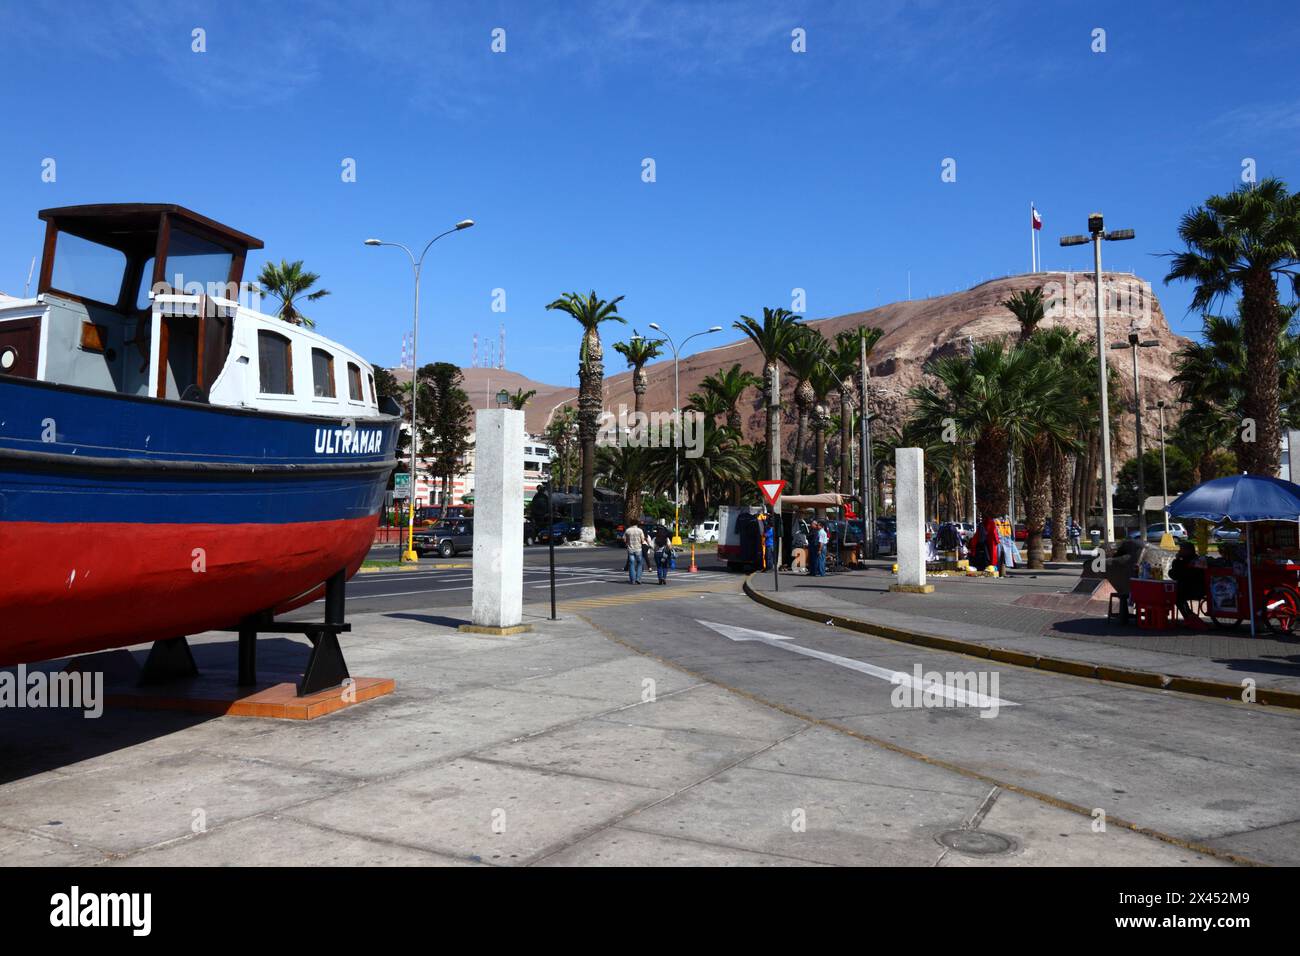 Fishing boat on Av Maximo Lira next to entrance to / exit from port, El Morro headland in background, Arica, Chile Stock Photo